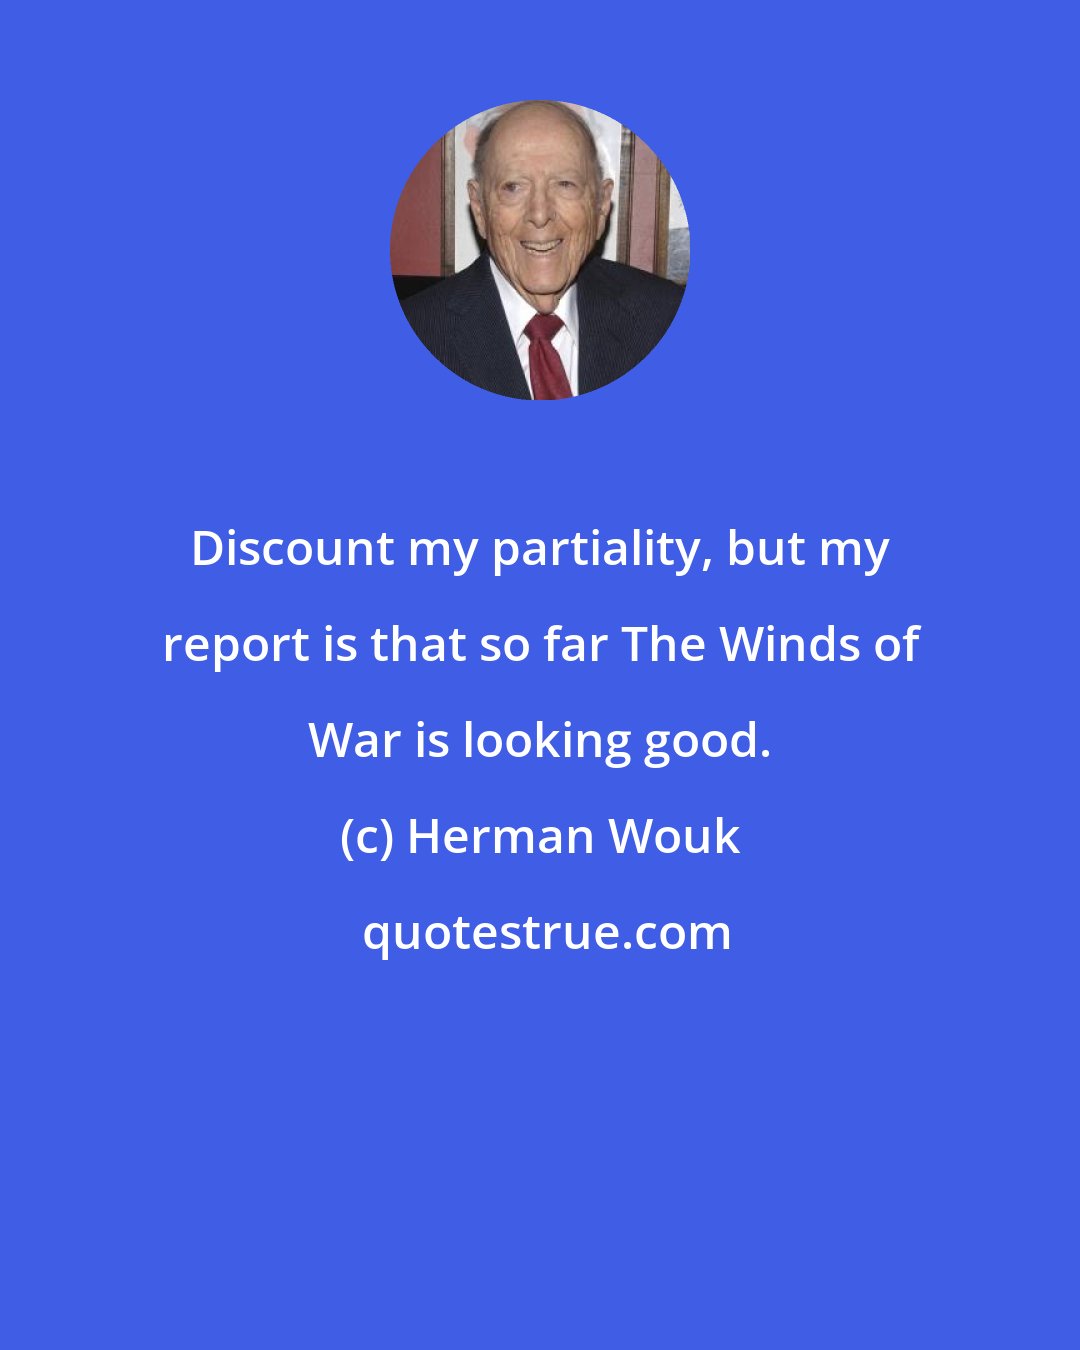 Herman Wouk: Discount my partiality, but my report is that so far The Winds of War is looking good.